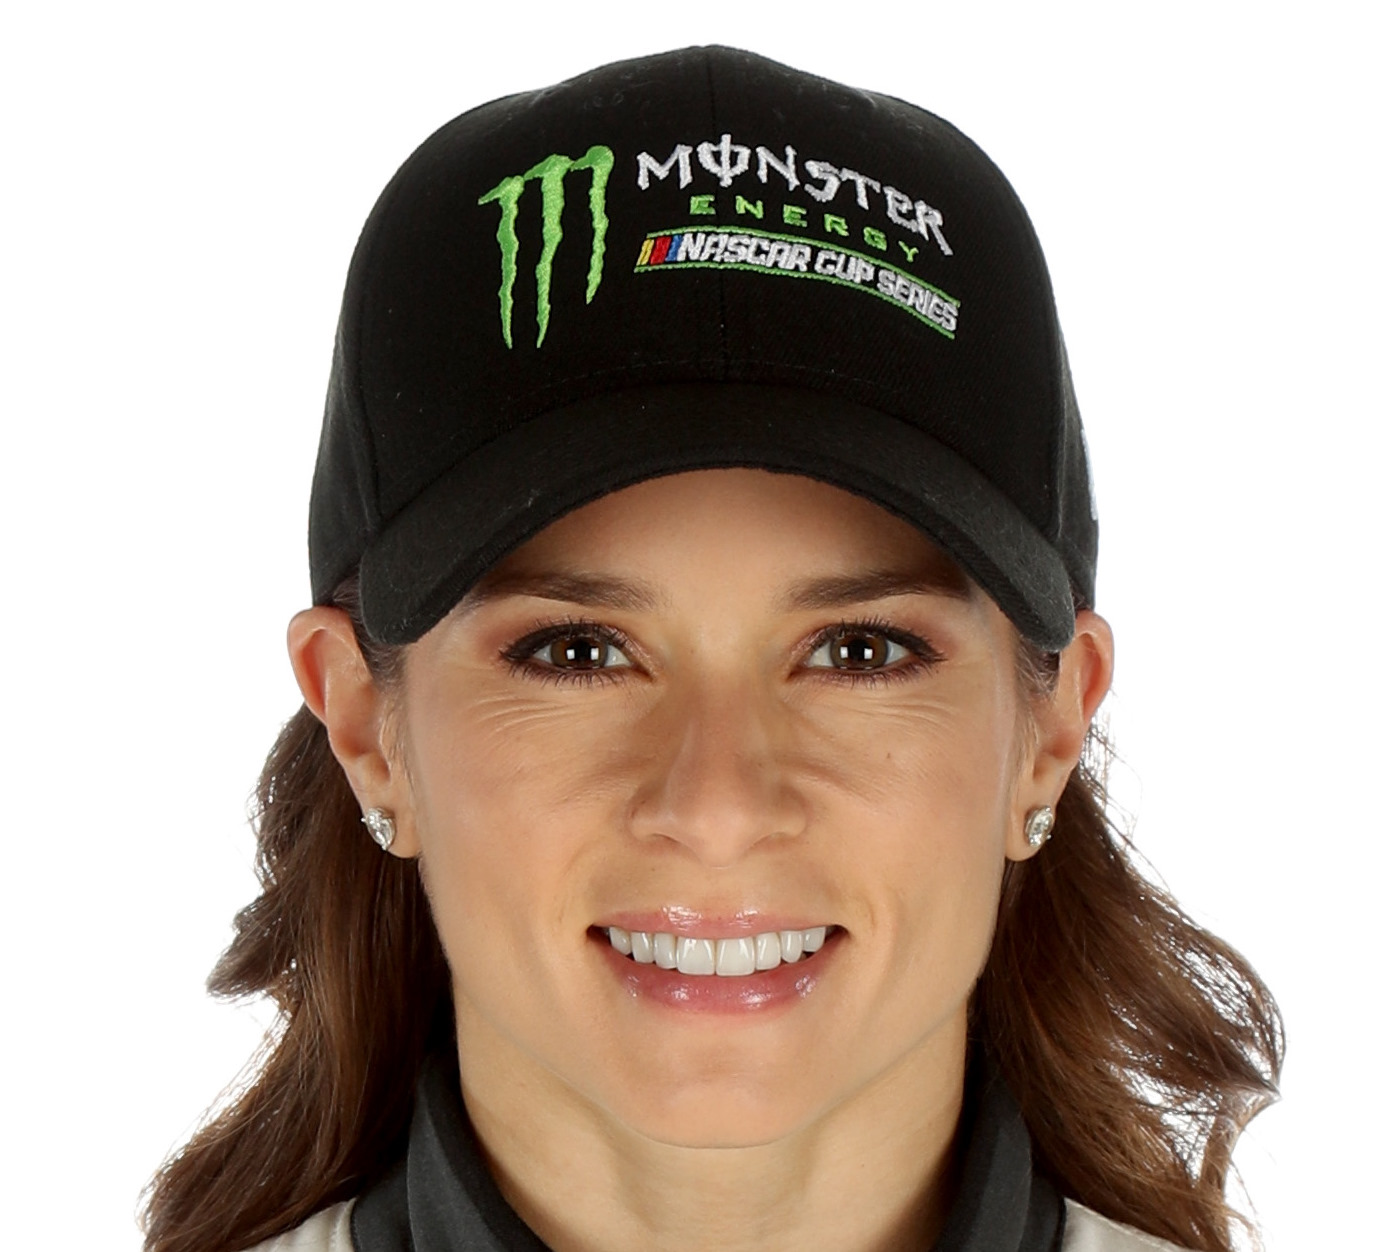 Danica Patrick's NASCAR career appears over. Time to marry Ricky and start a family while she is still young enough.